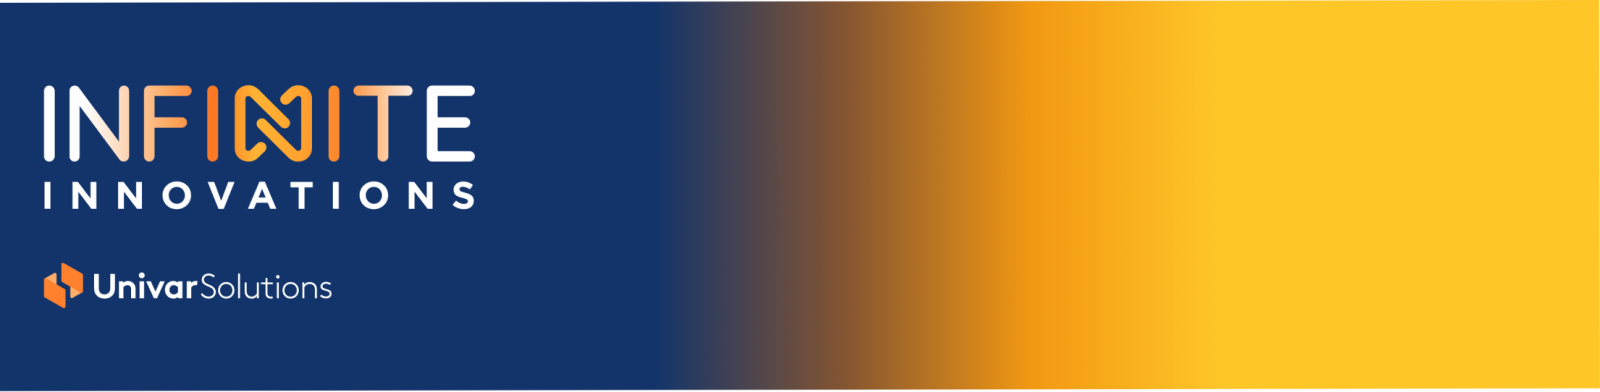 Blue to yellow gradient banner with the text "Infinite Innovations" above the Univar Solutions logo